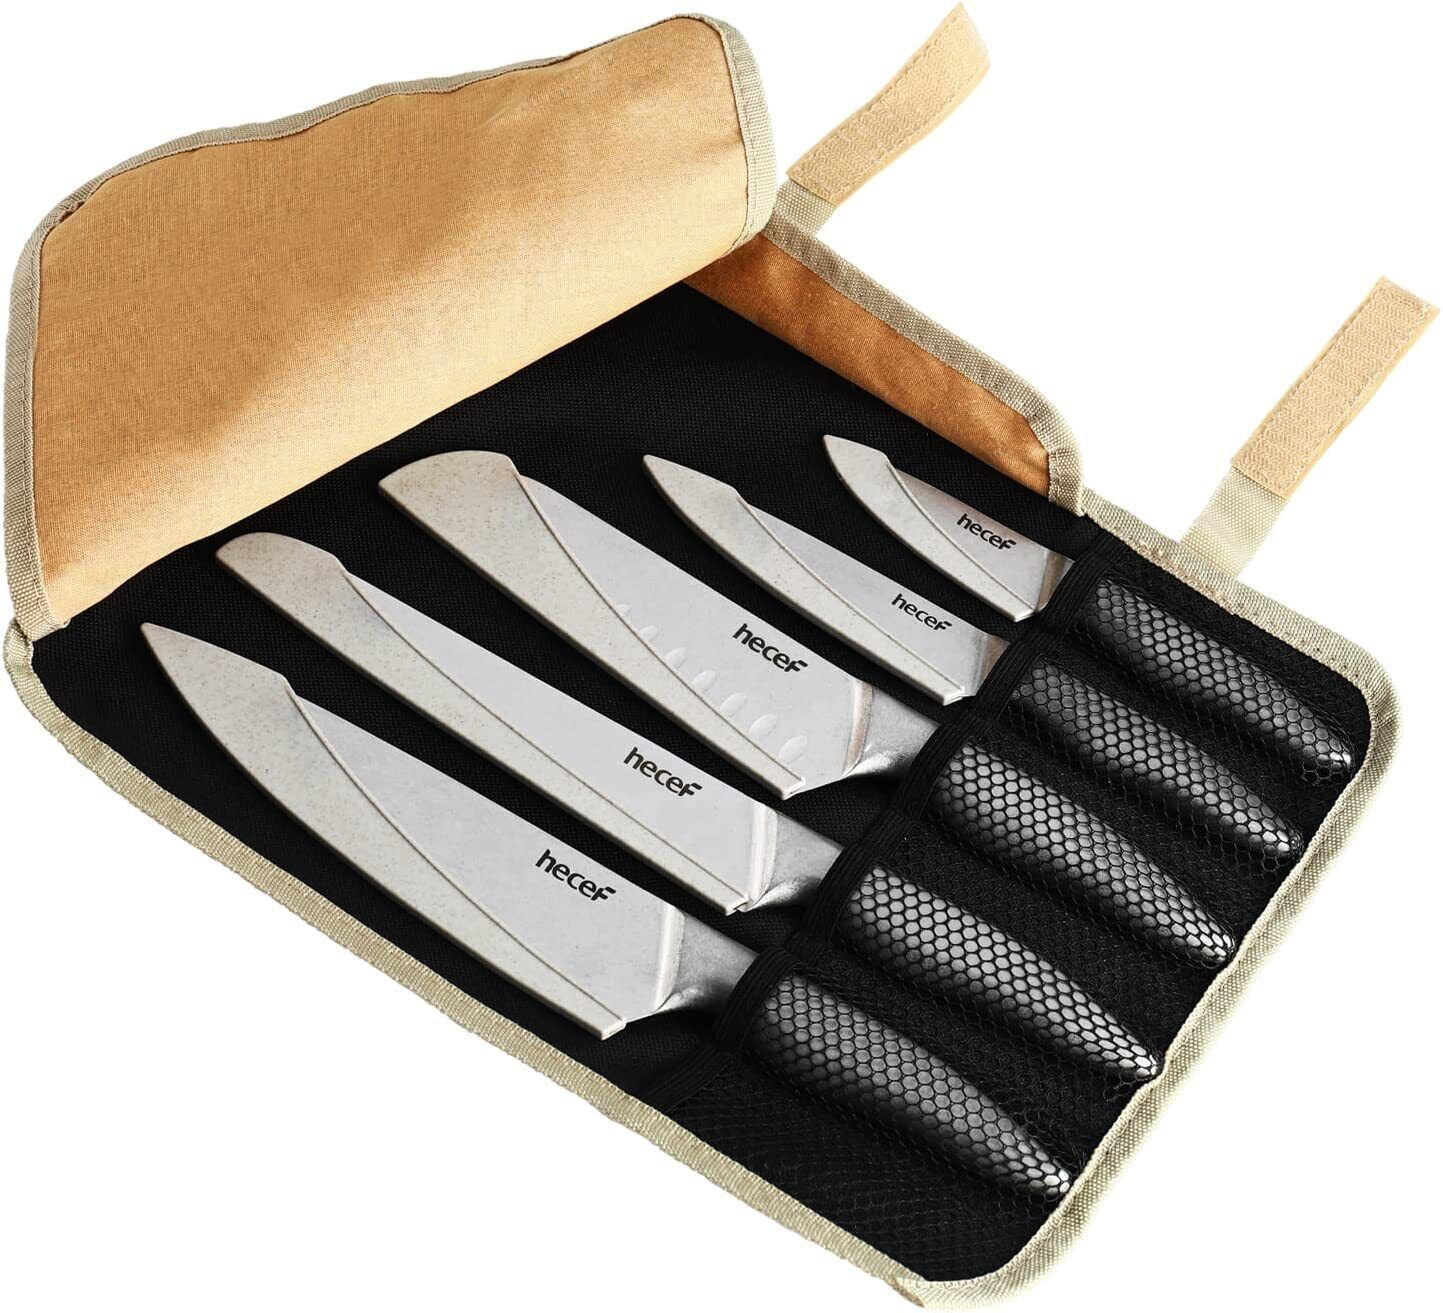 Hecef 5pcs Vintage Kitchen Knife Set, Professional Ultra Sharp Stainless Steel Cooking Chef Knives with Sheaths, Size: 8, Black